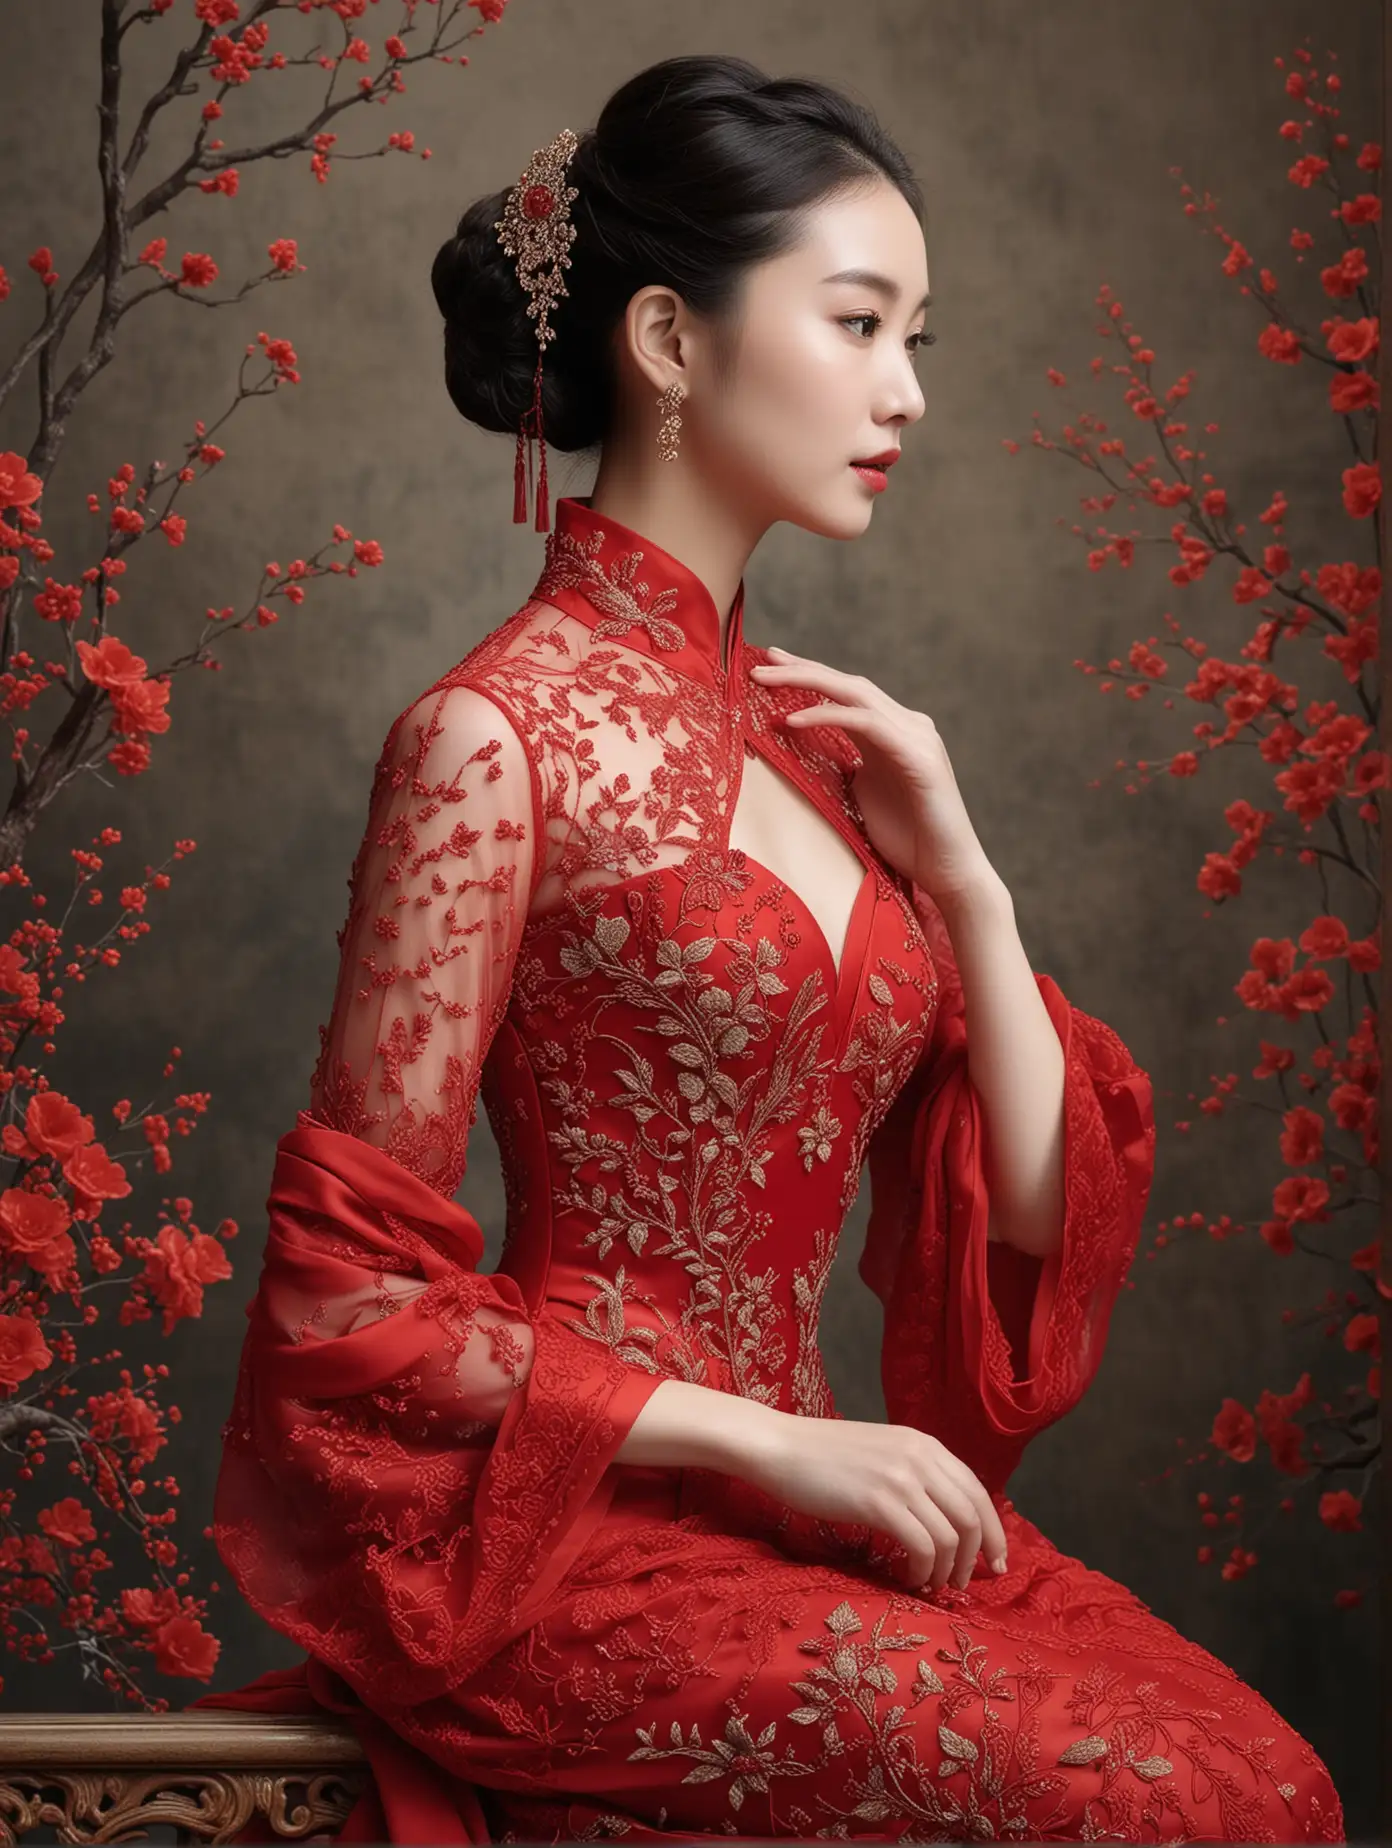 Elegant Red Dress with Intricate Lacework and Beading